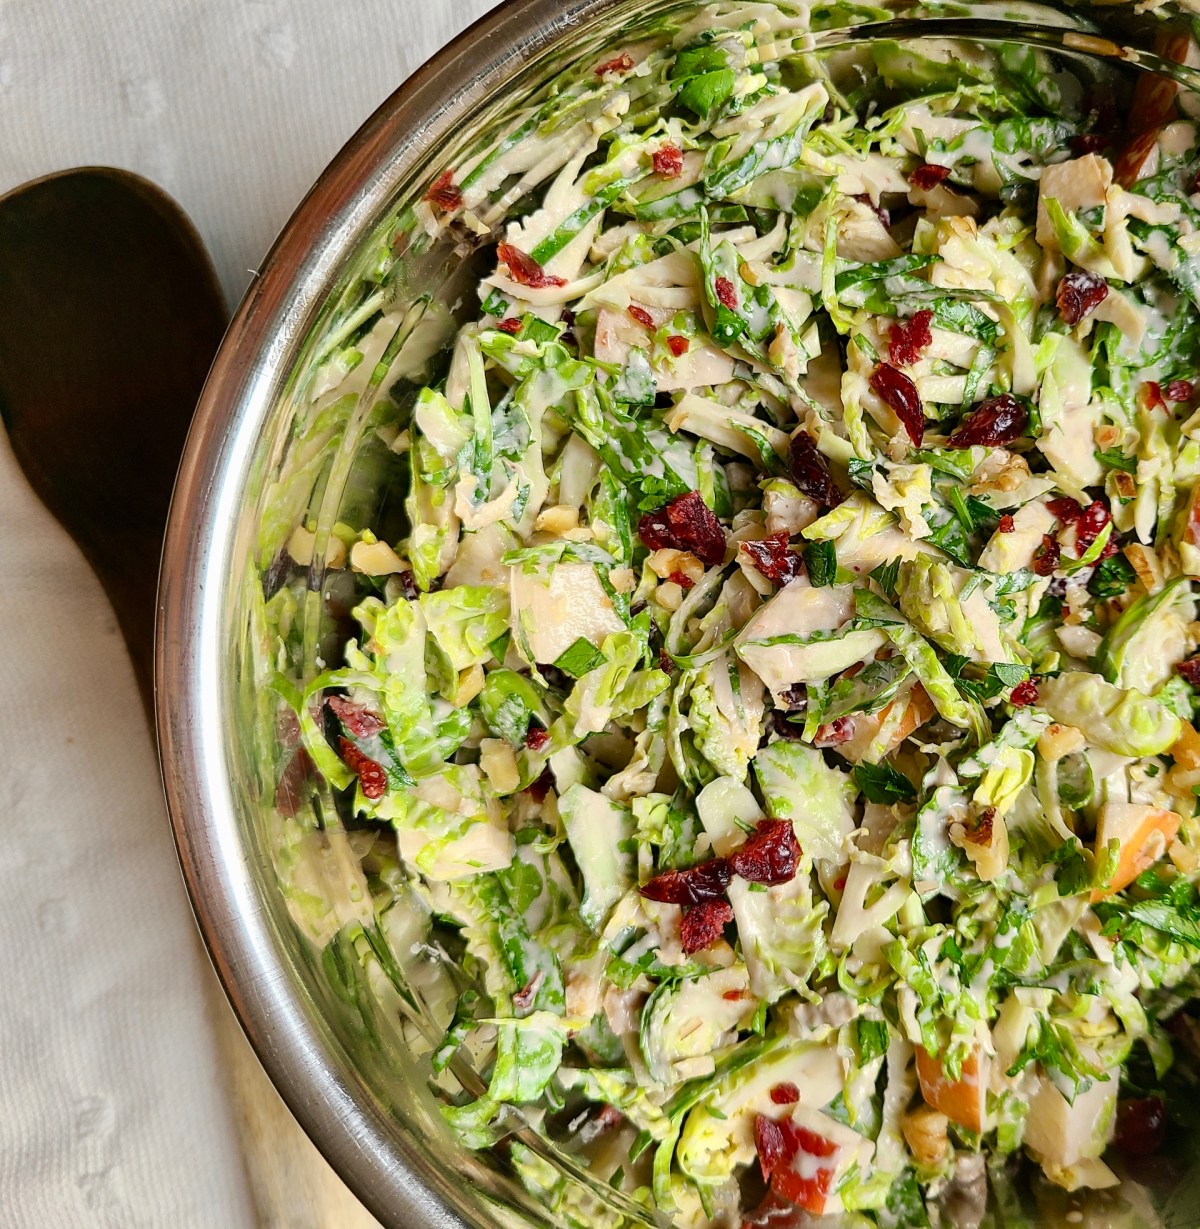 Vegan Brussels Sprout Slaw with Cranberries, Apples and Walnuts